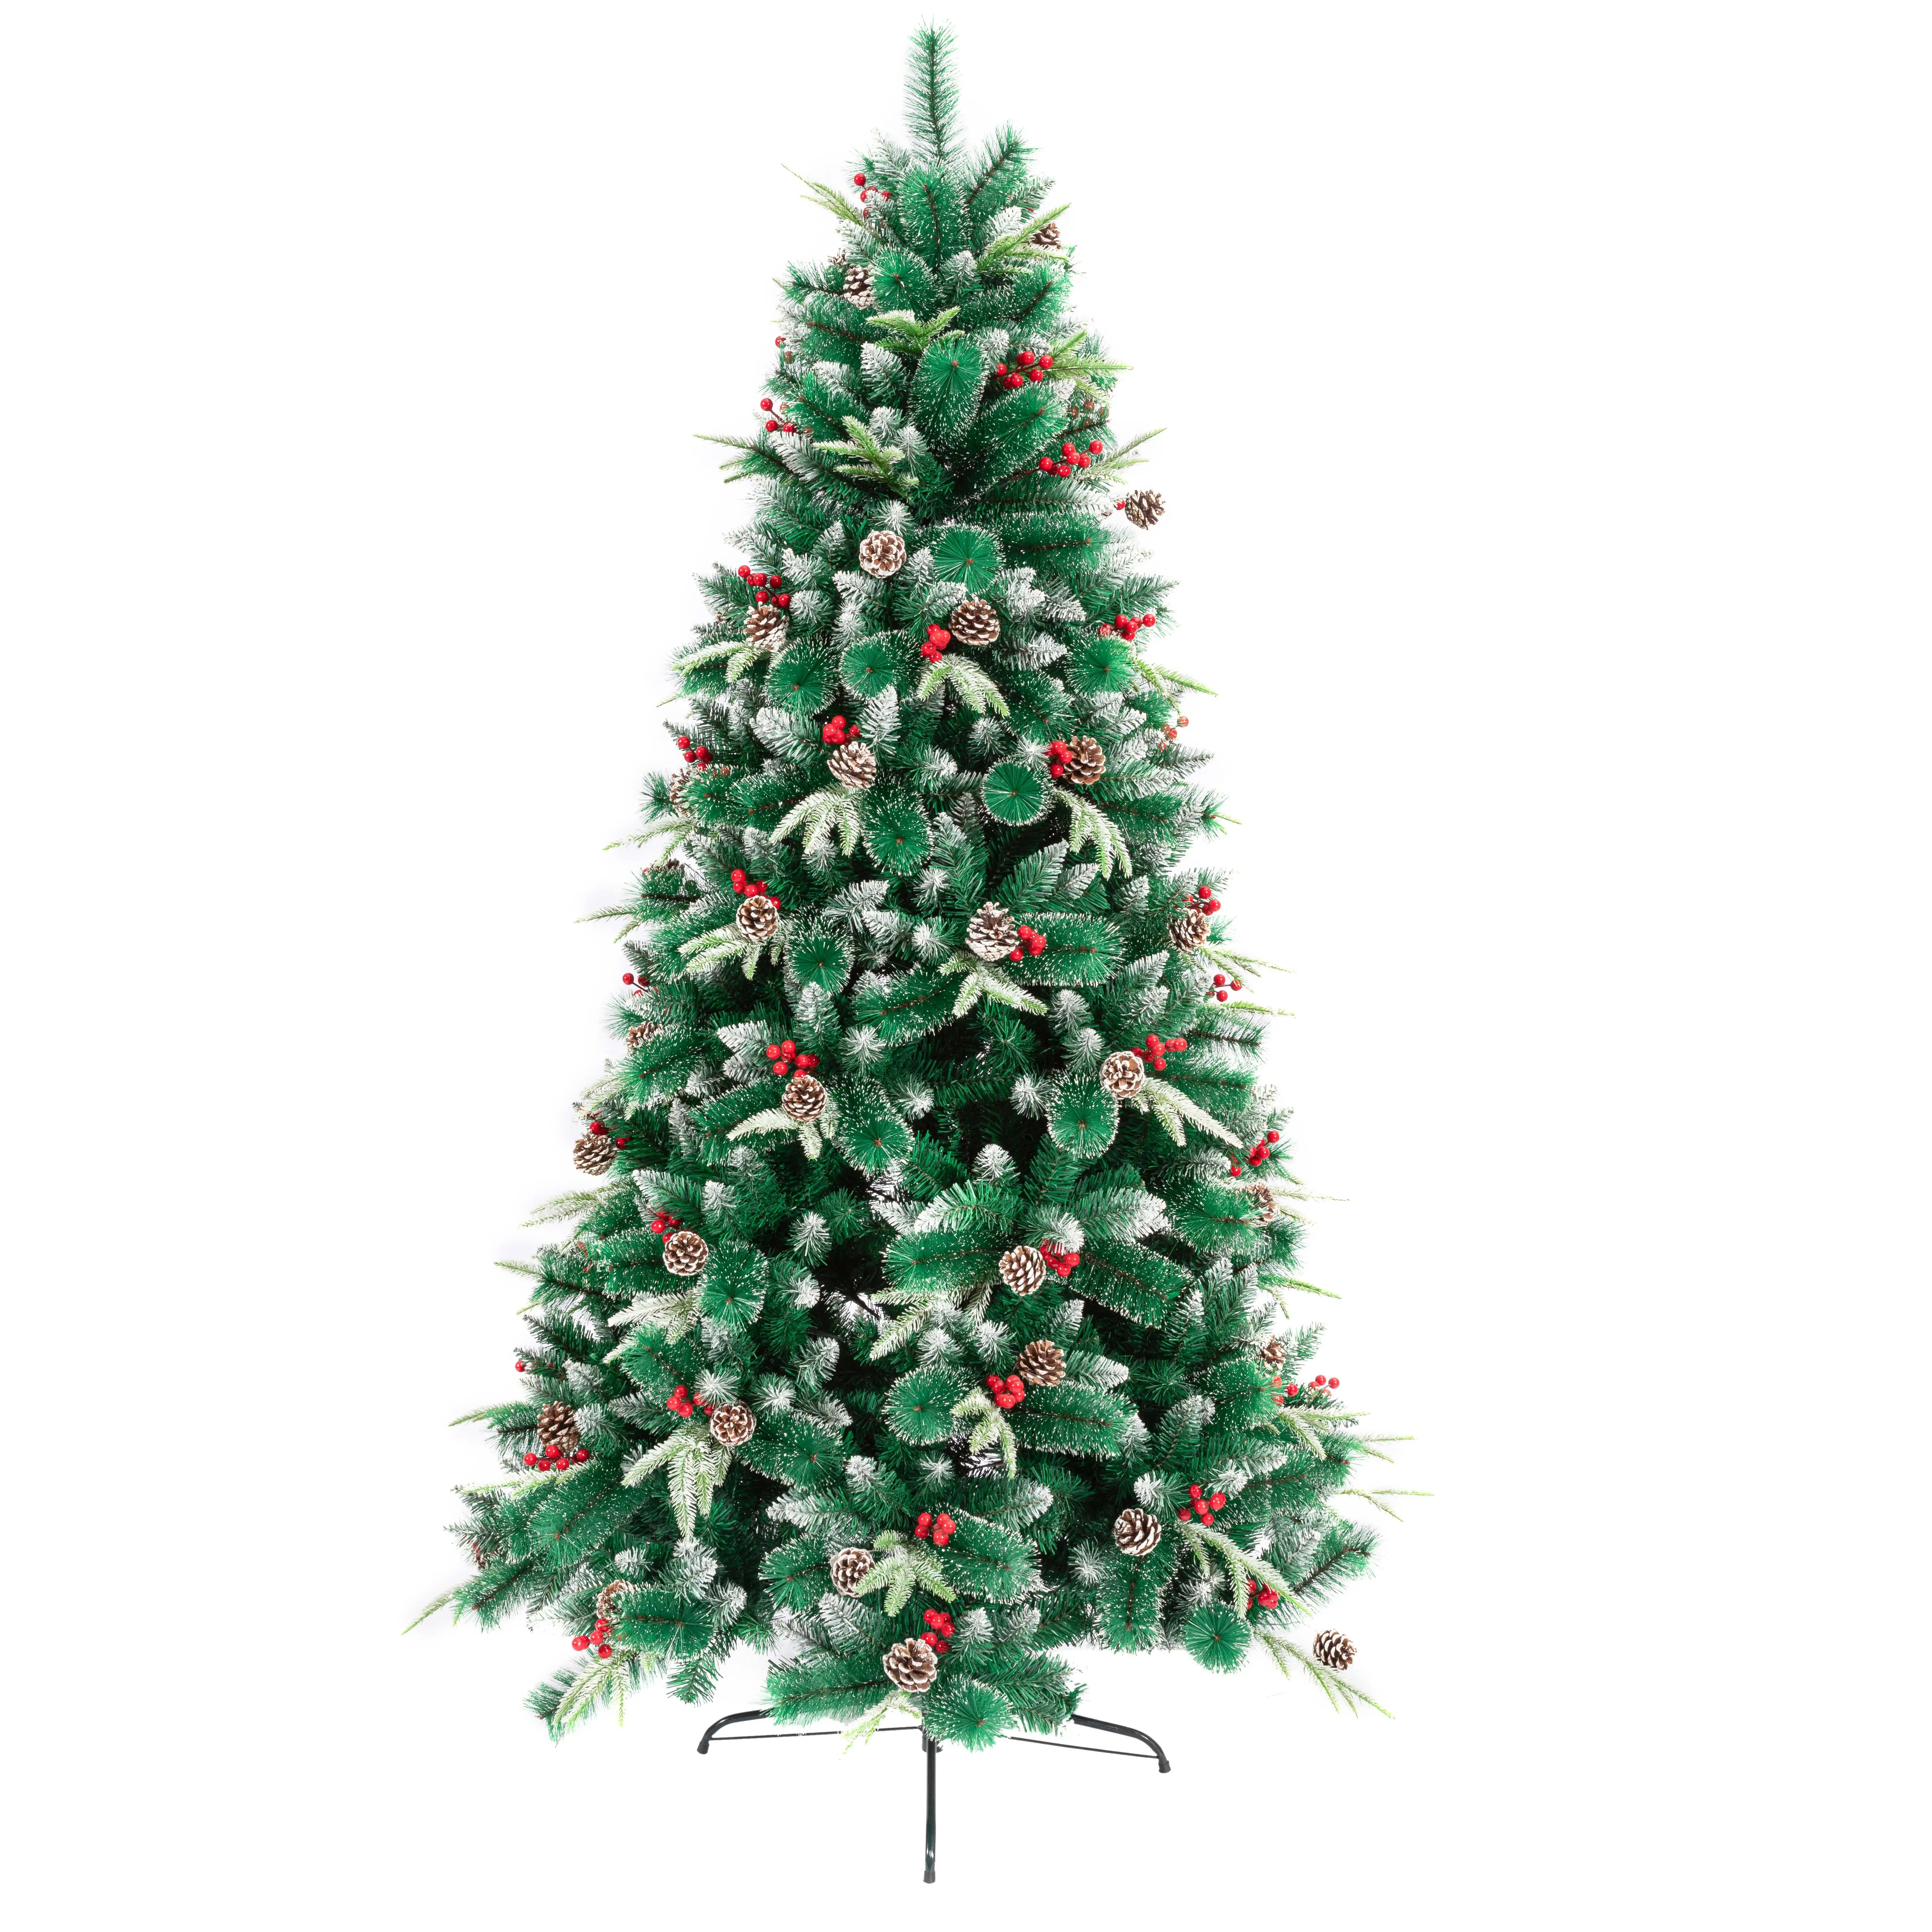 leheyy PVC material simulation spruce Christmas holiday party decoration quick assembly suitable for family interaction